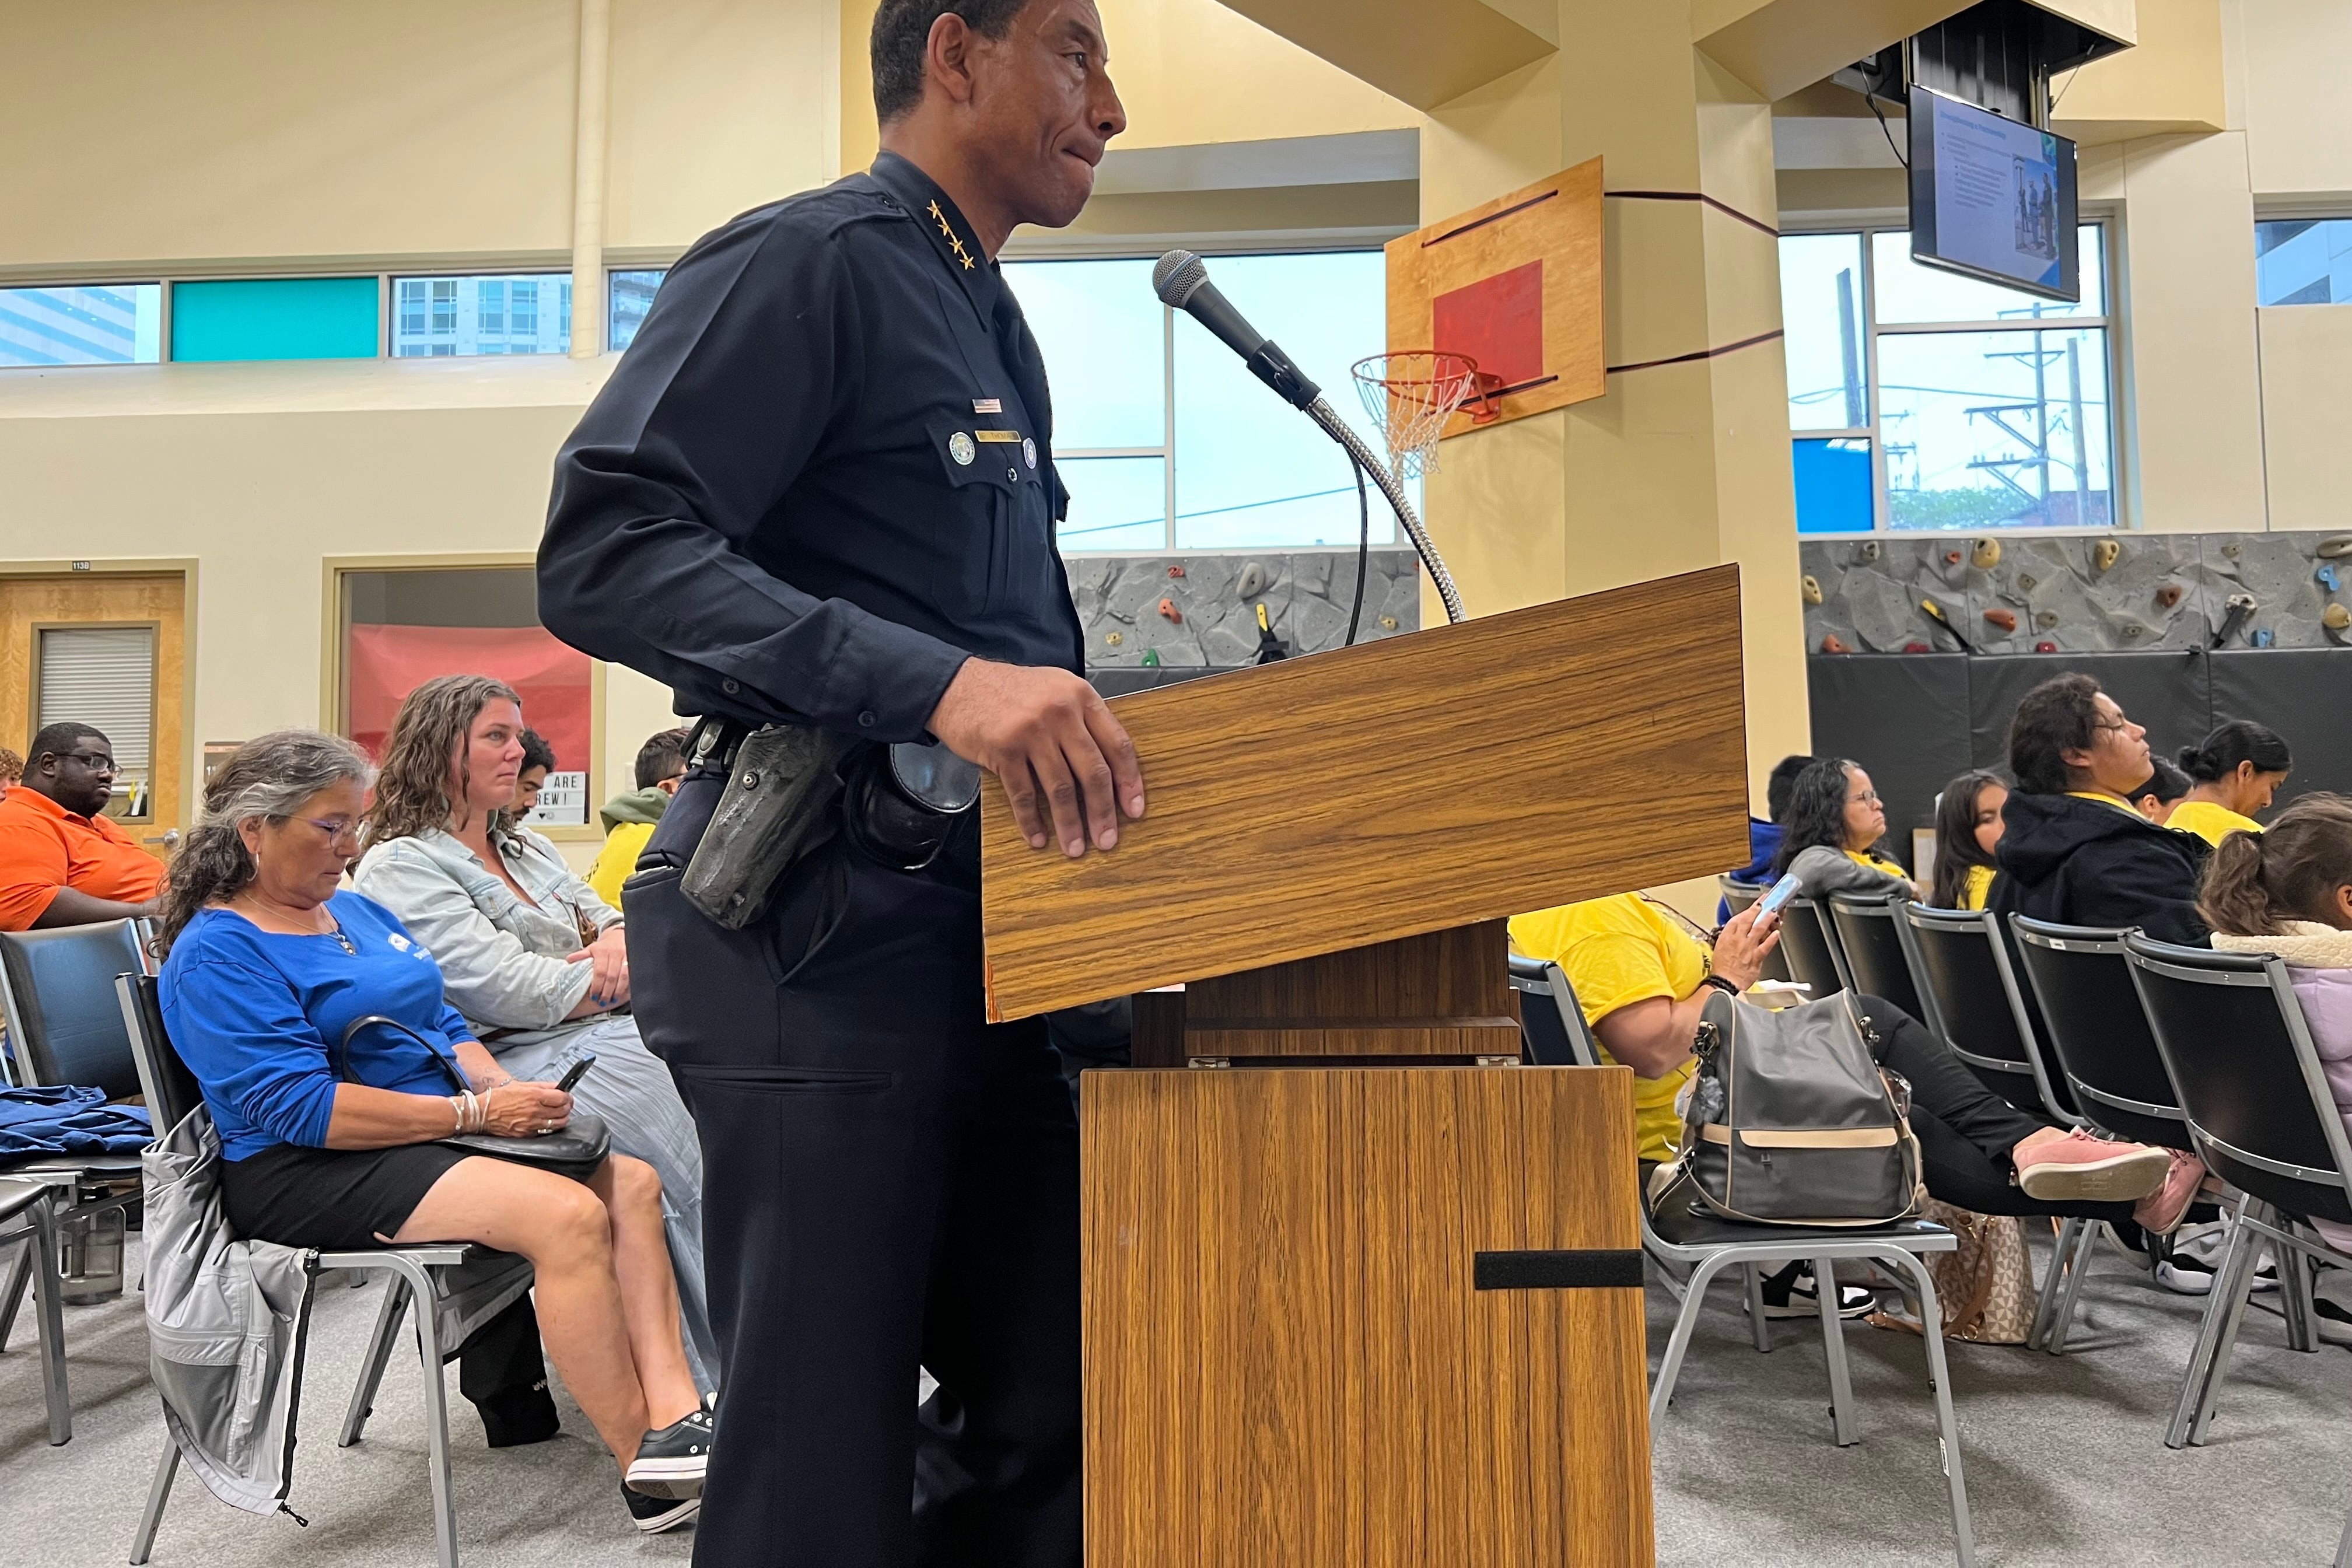 Denver Police Chief Ron Thomas stands at a podium in the auditorium where the Denver school board holds public comment. You can see audience members seated behind him.